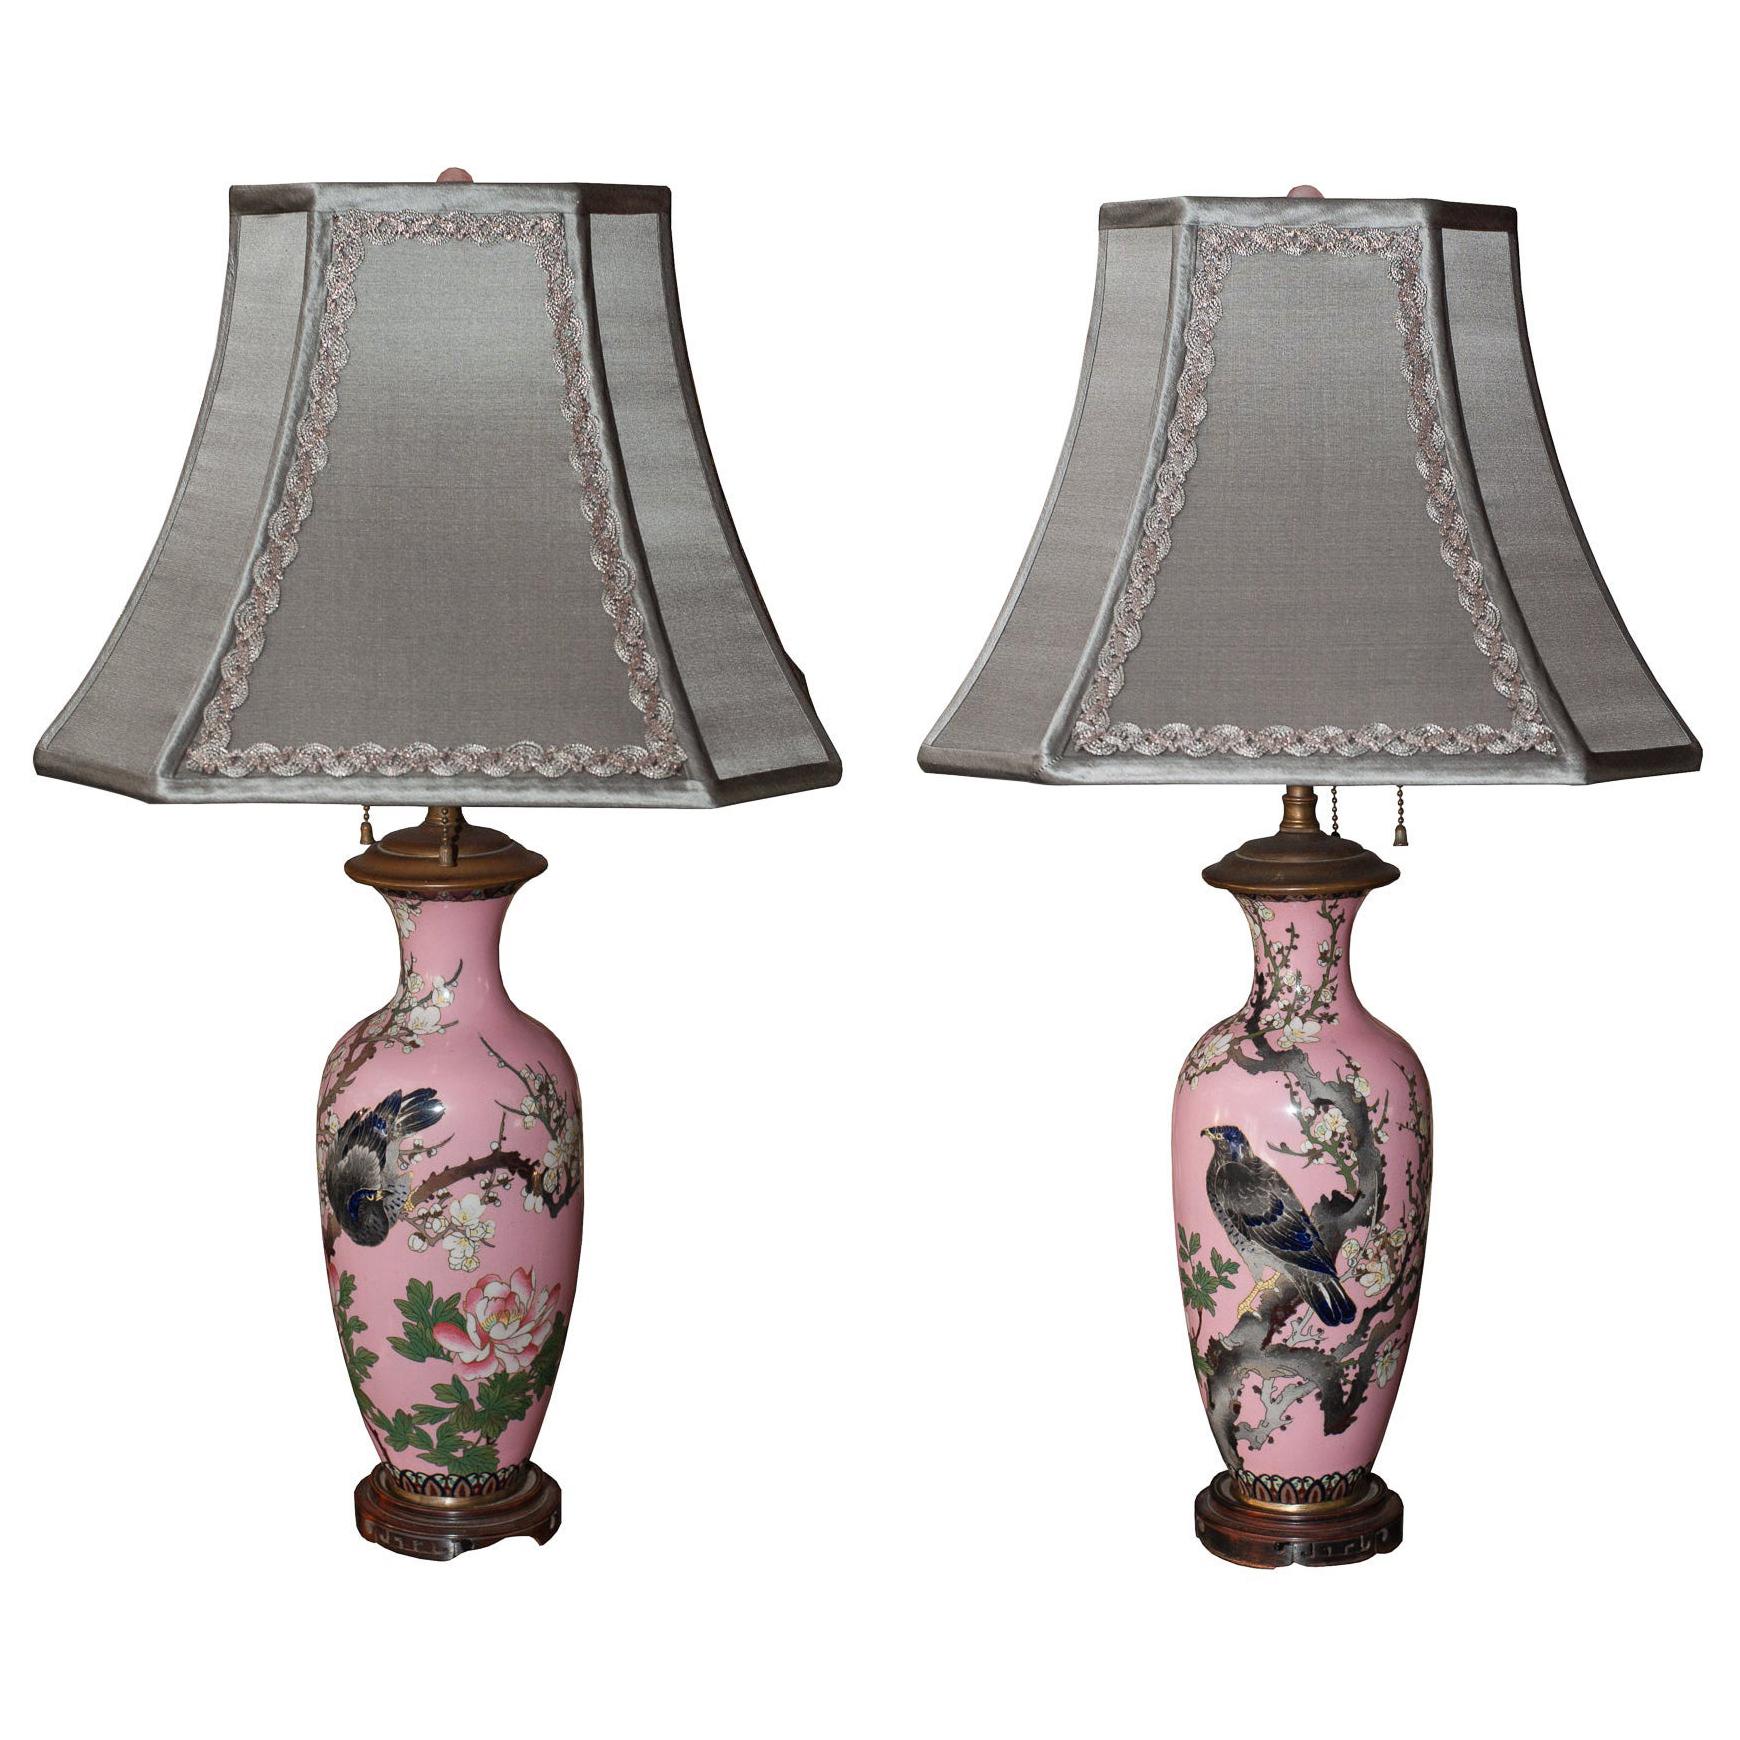 Antique Pair of Japanese Handpainted Pink Porcelain Lamps with Silver Shades For Sale